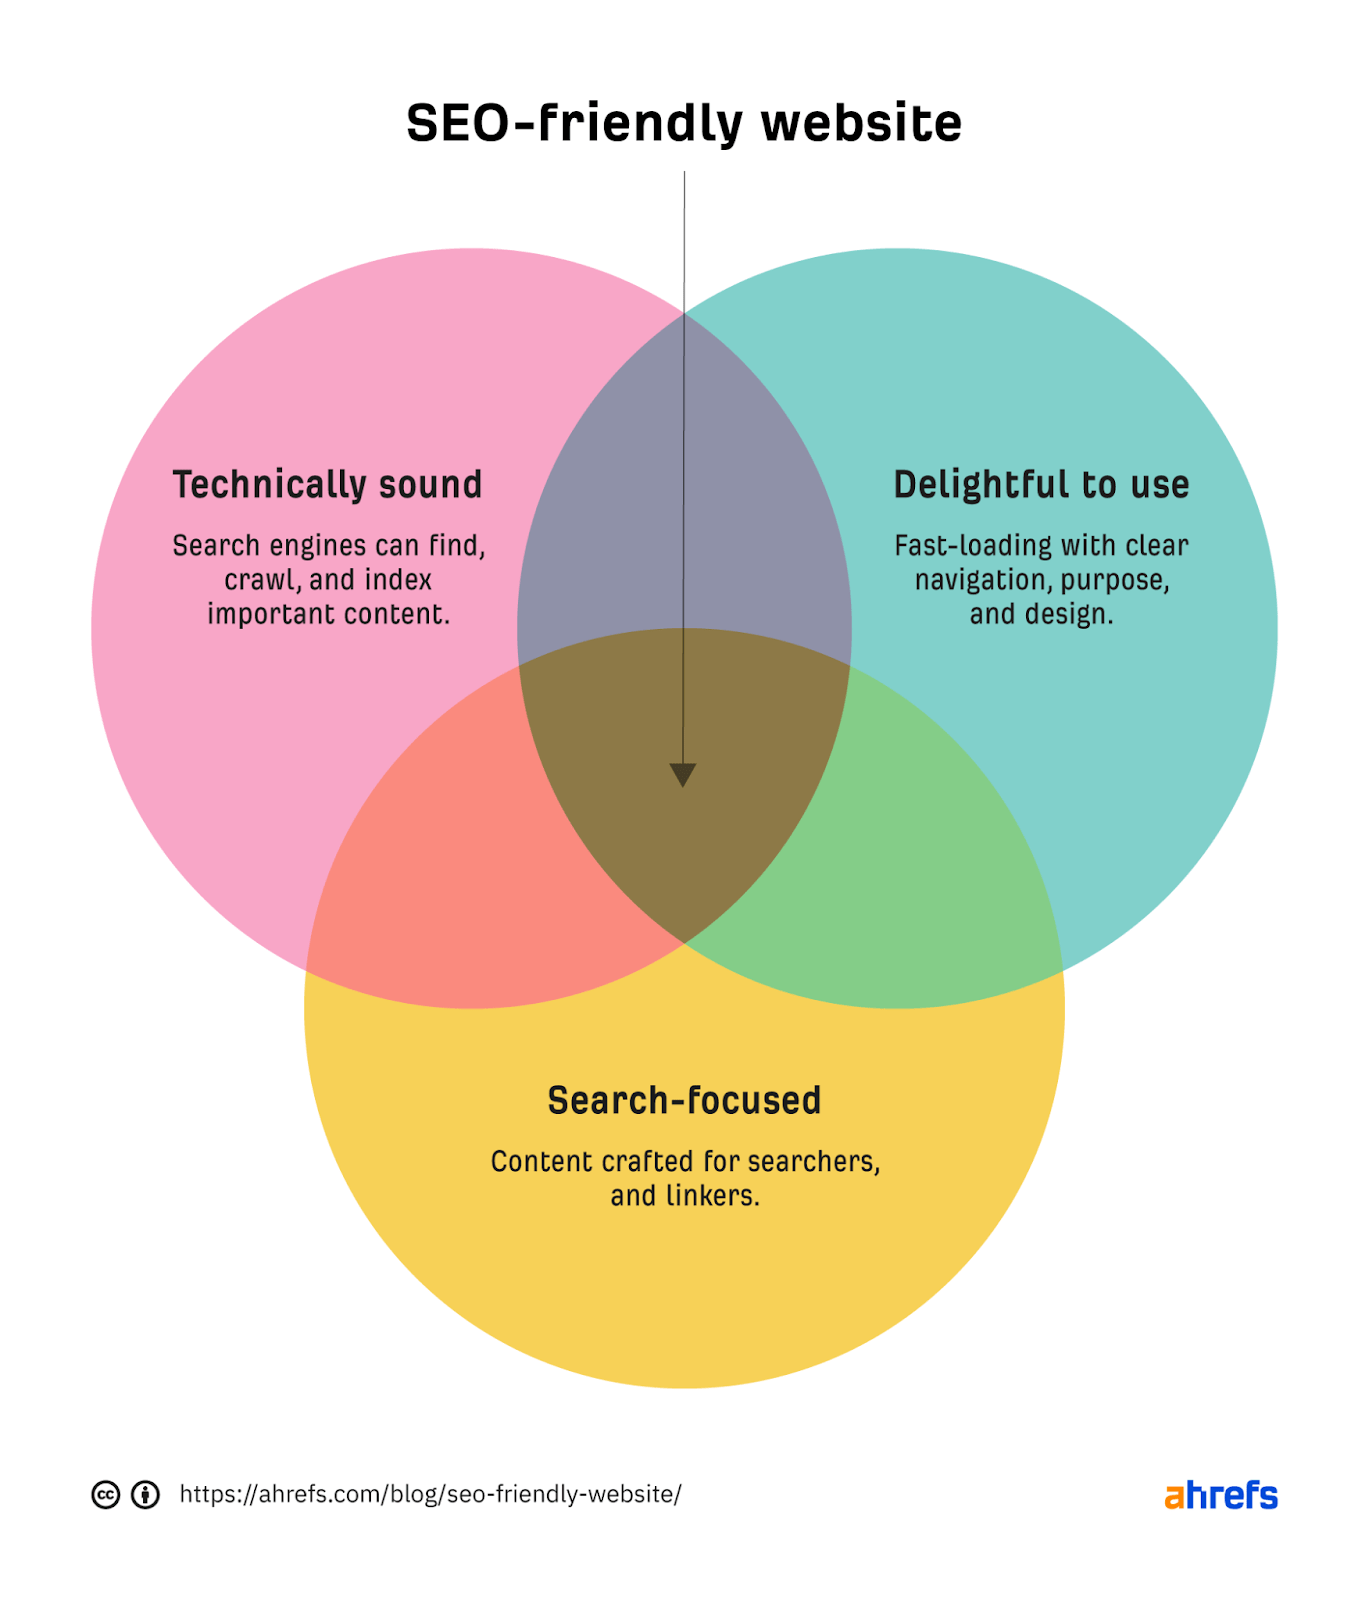 Venn diagram showing an SEO-friendly website is the intersection of 3 aspects: technically sound, delightful to use, and search-focused